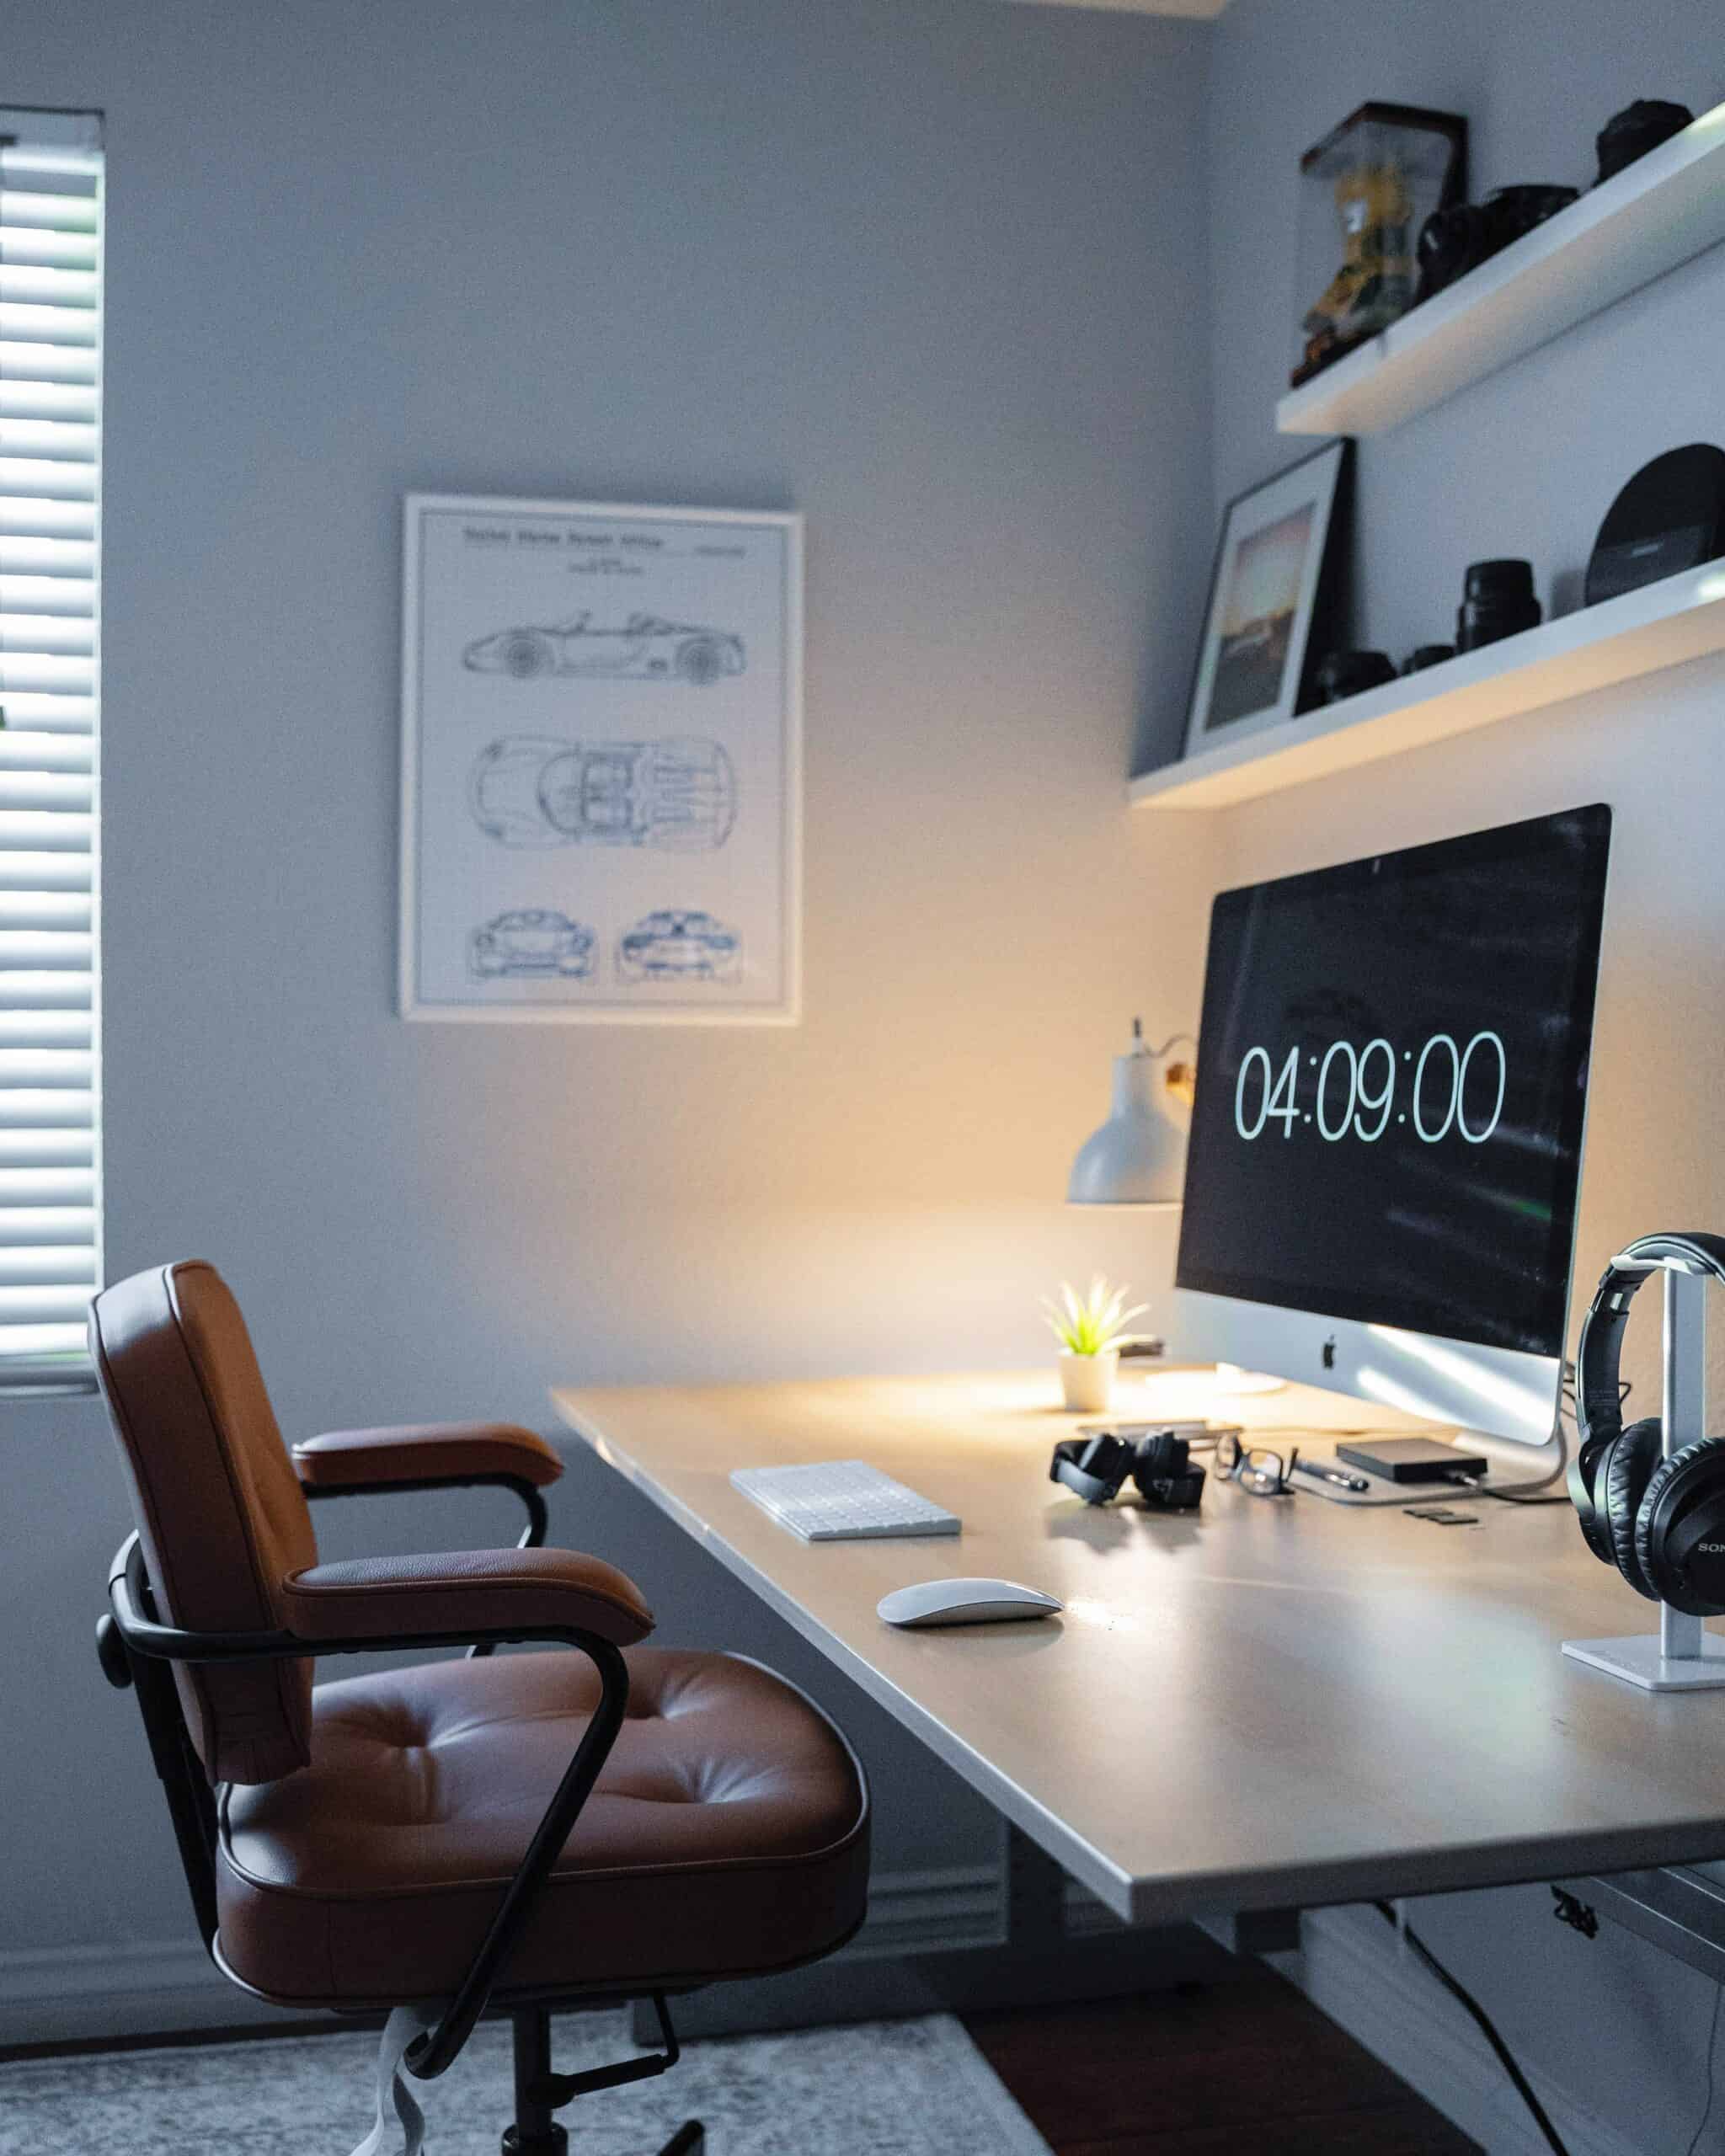 20 Easy Home Office Organization Ideas to Boost Your Productivity